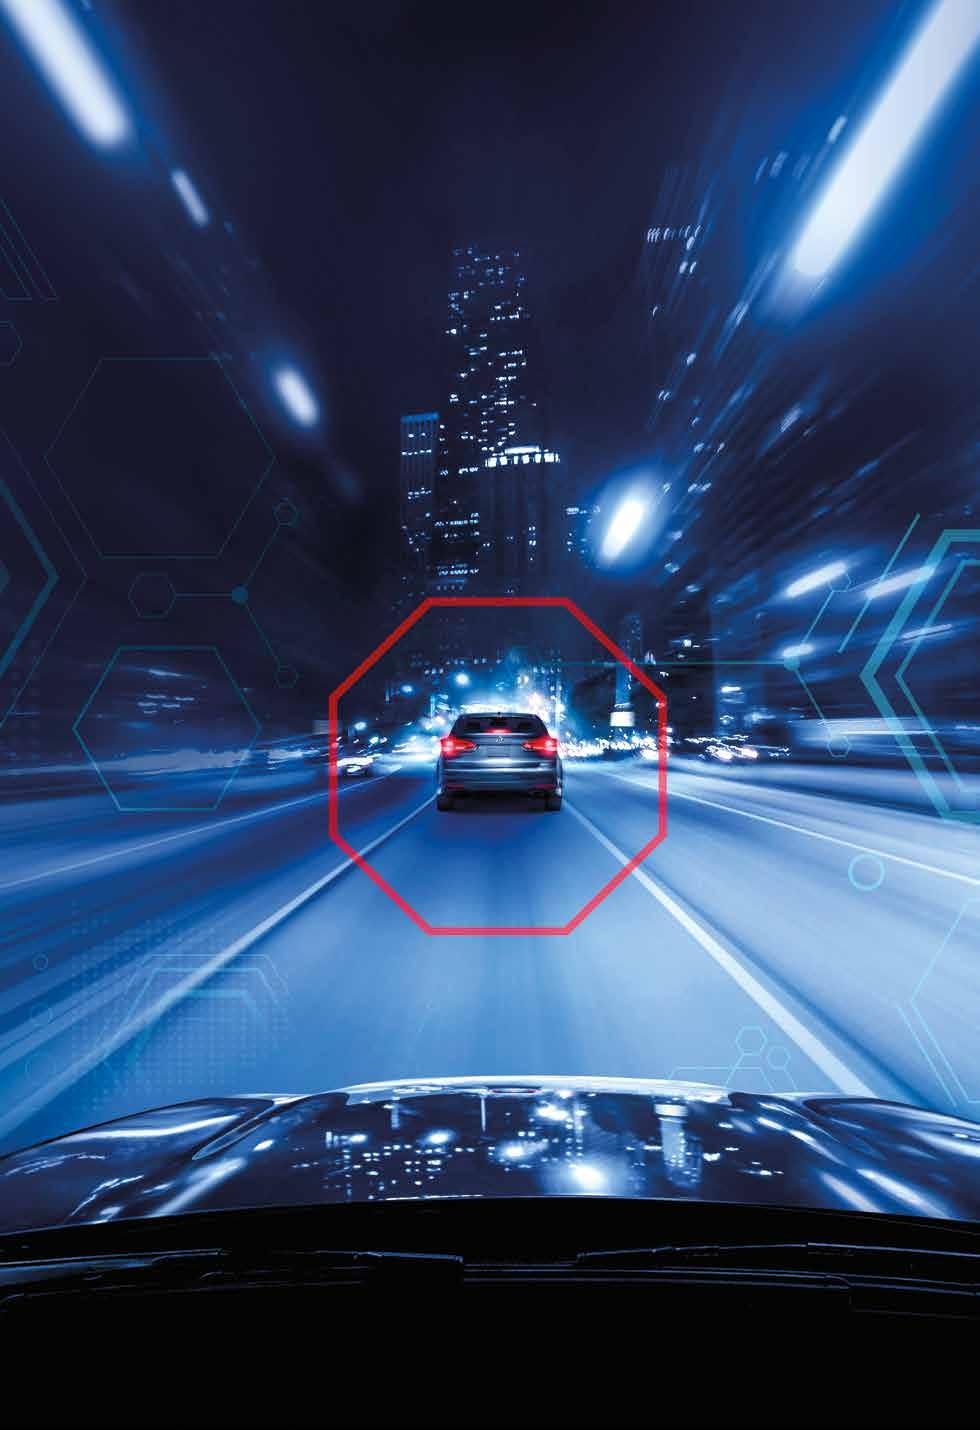 KIA.CA/FORTE BRAKING ASSISTANCE Senses, alerts and helps you STOP It s like having a co-pilot always on the lookout with these advanced features.